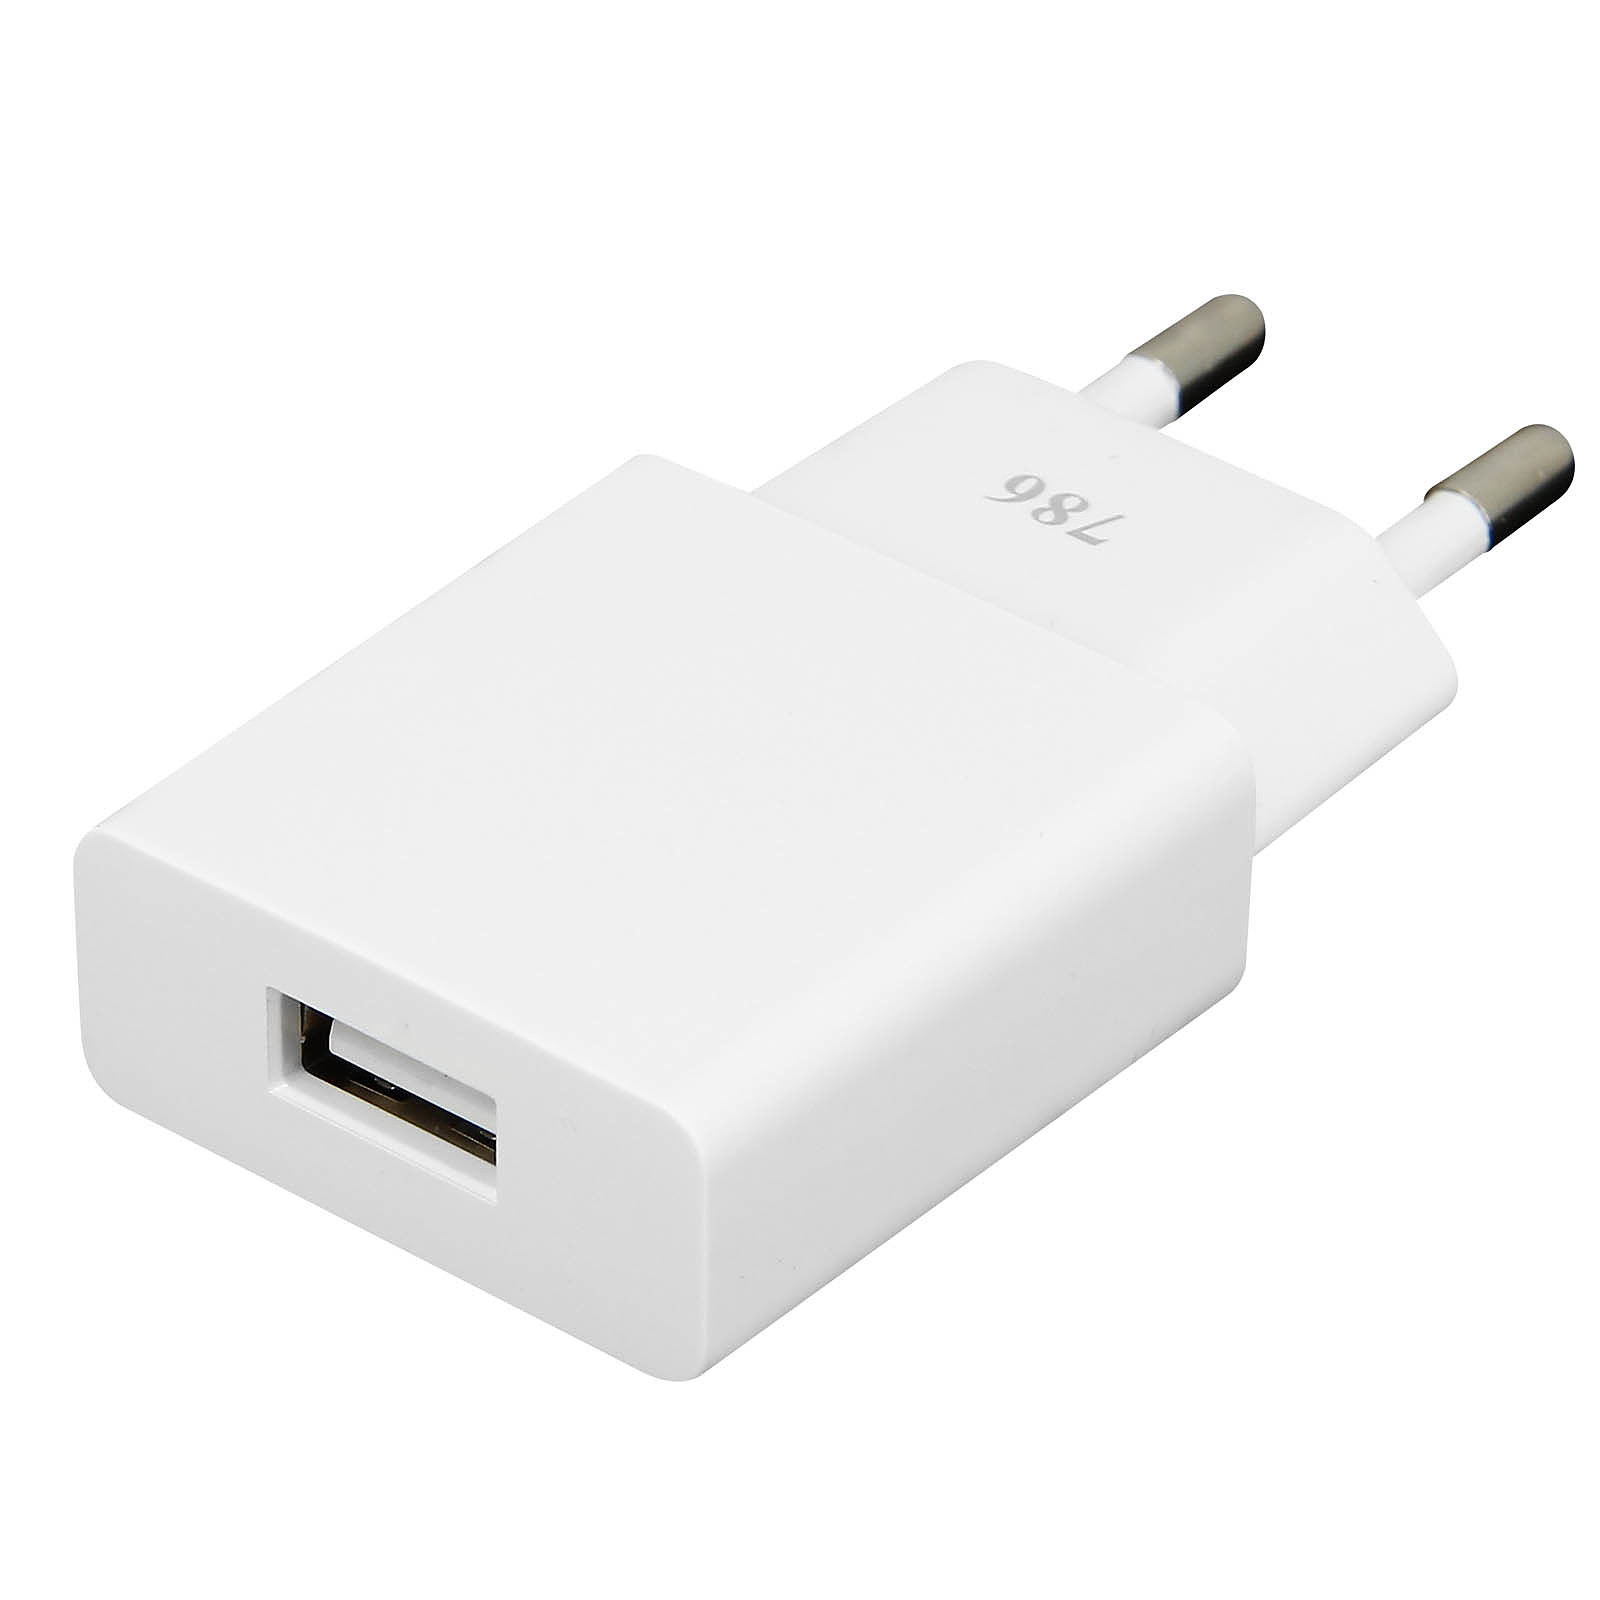 Avizar Chargeur USB Secteur Universel 2.1A + Cable USB type C Charge & Synchro Blanc - Chargeur telephone Avizar